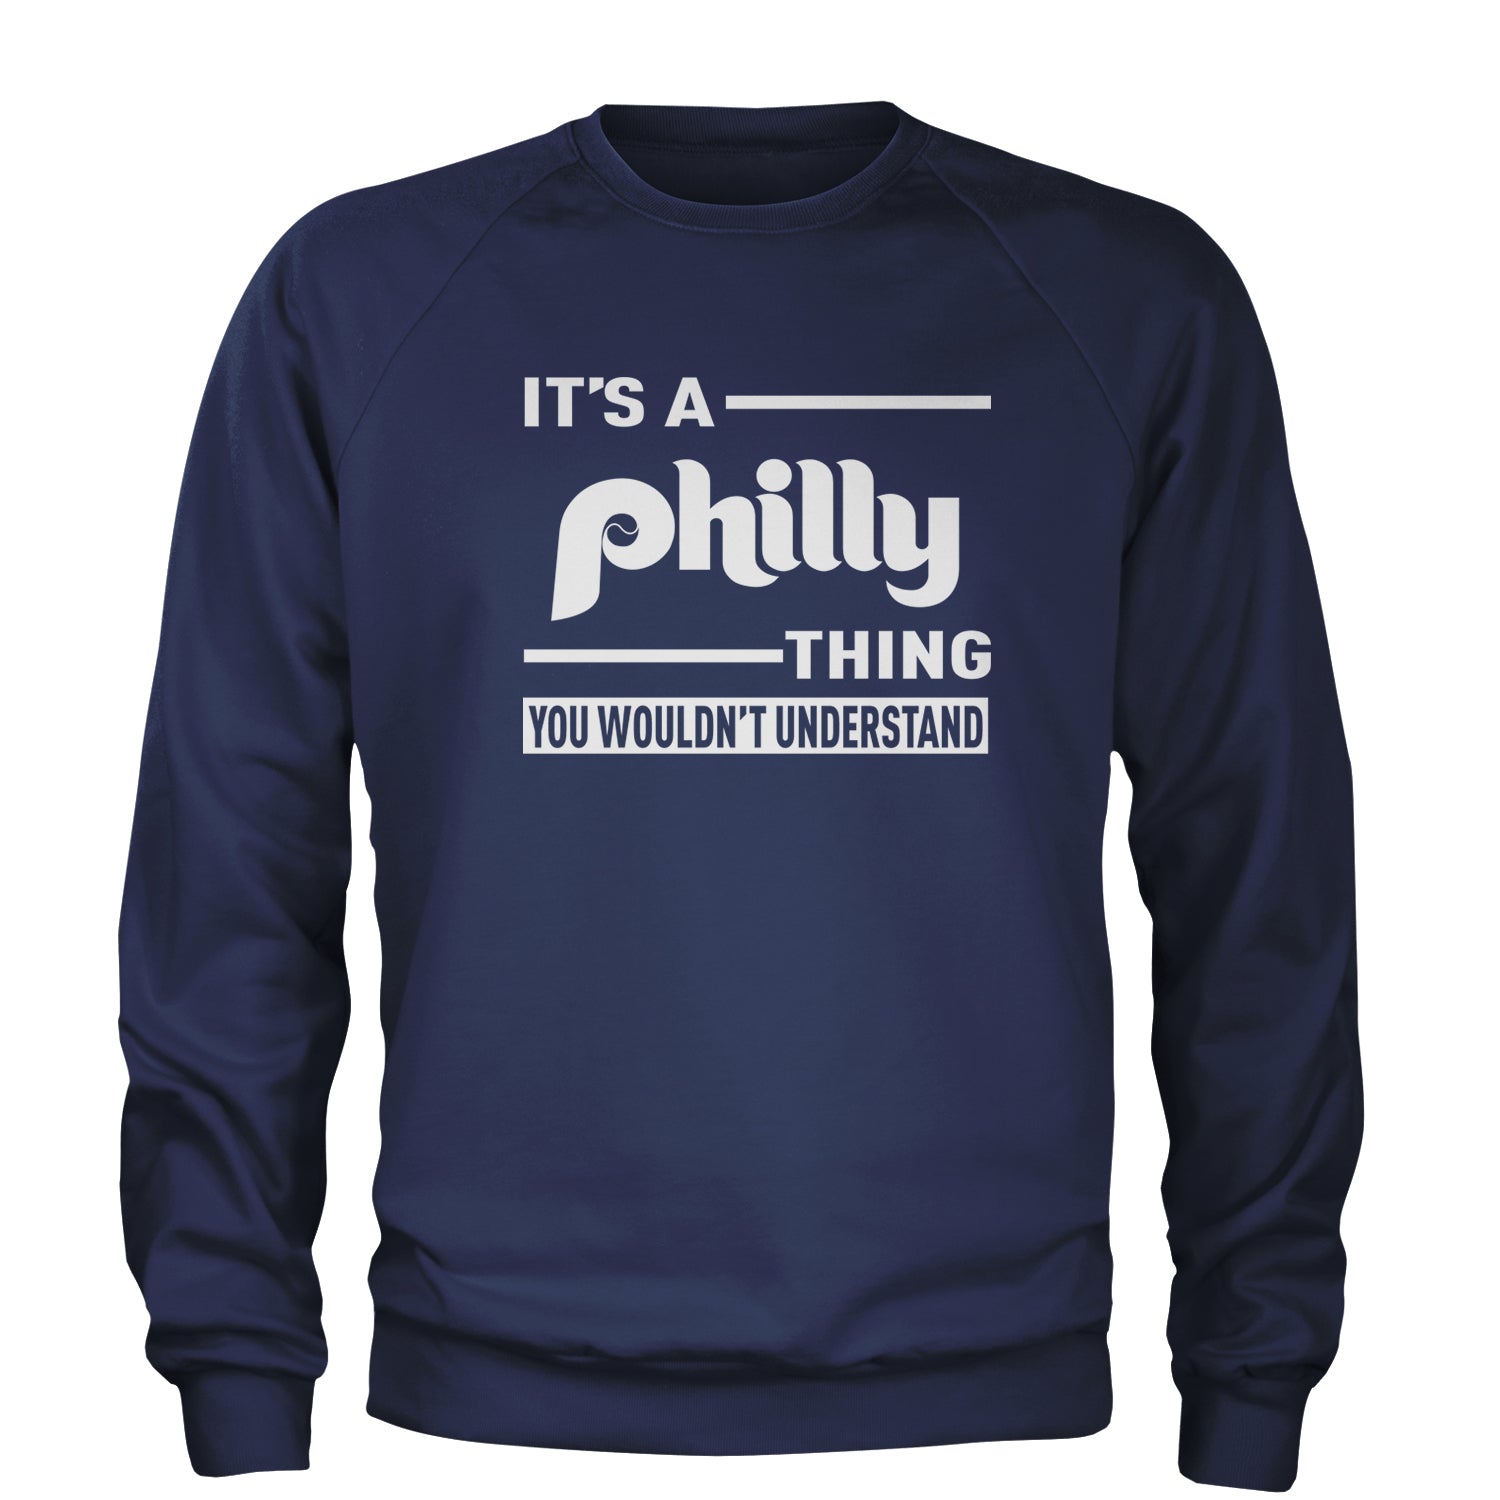 It's A Philly Thing, You Wouldn't Understand Adult Crewneck Sweatshirt baseball, filly, football, jawn, morgan, Philadelphia, philli by Expression Tees